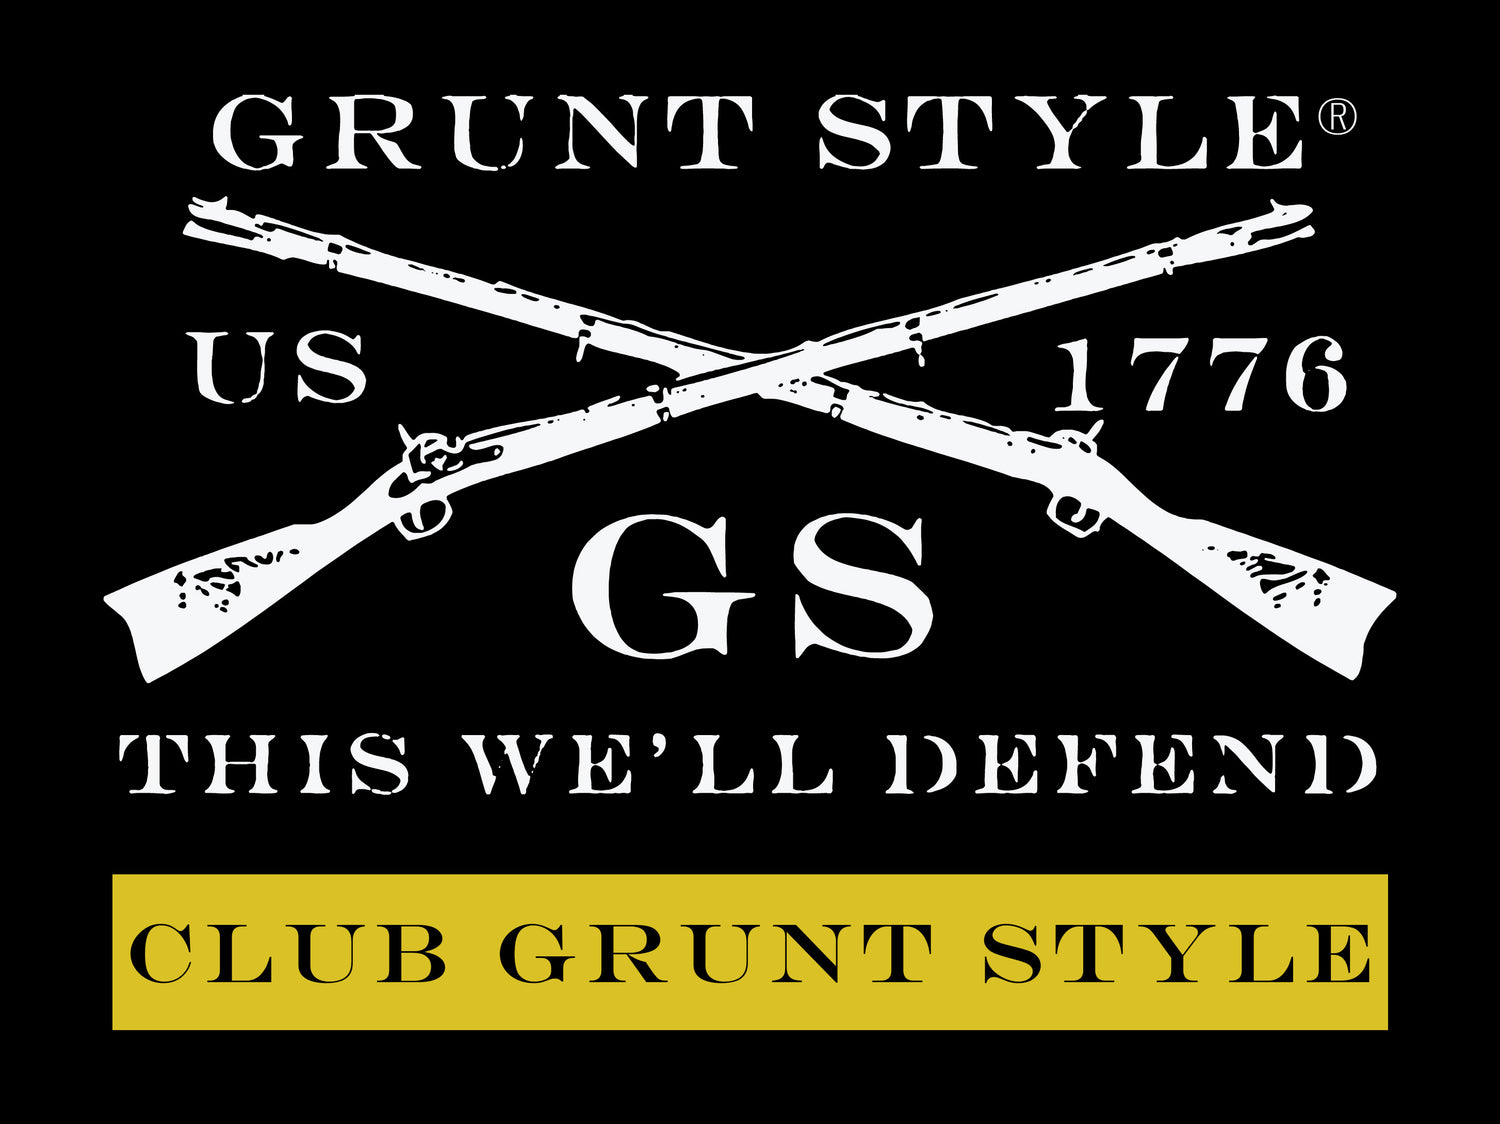 Club Grunt Style Men's Six Month Subscription | Grunt Style 